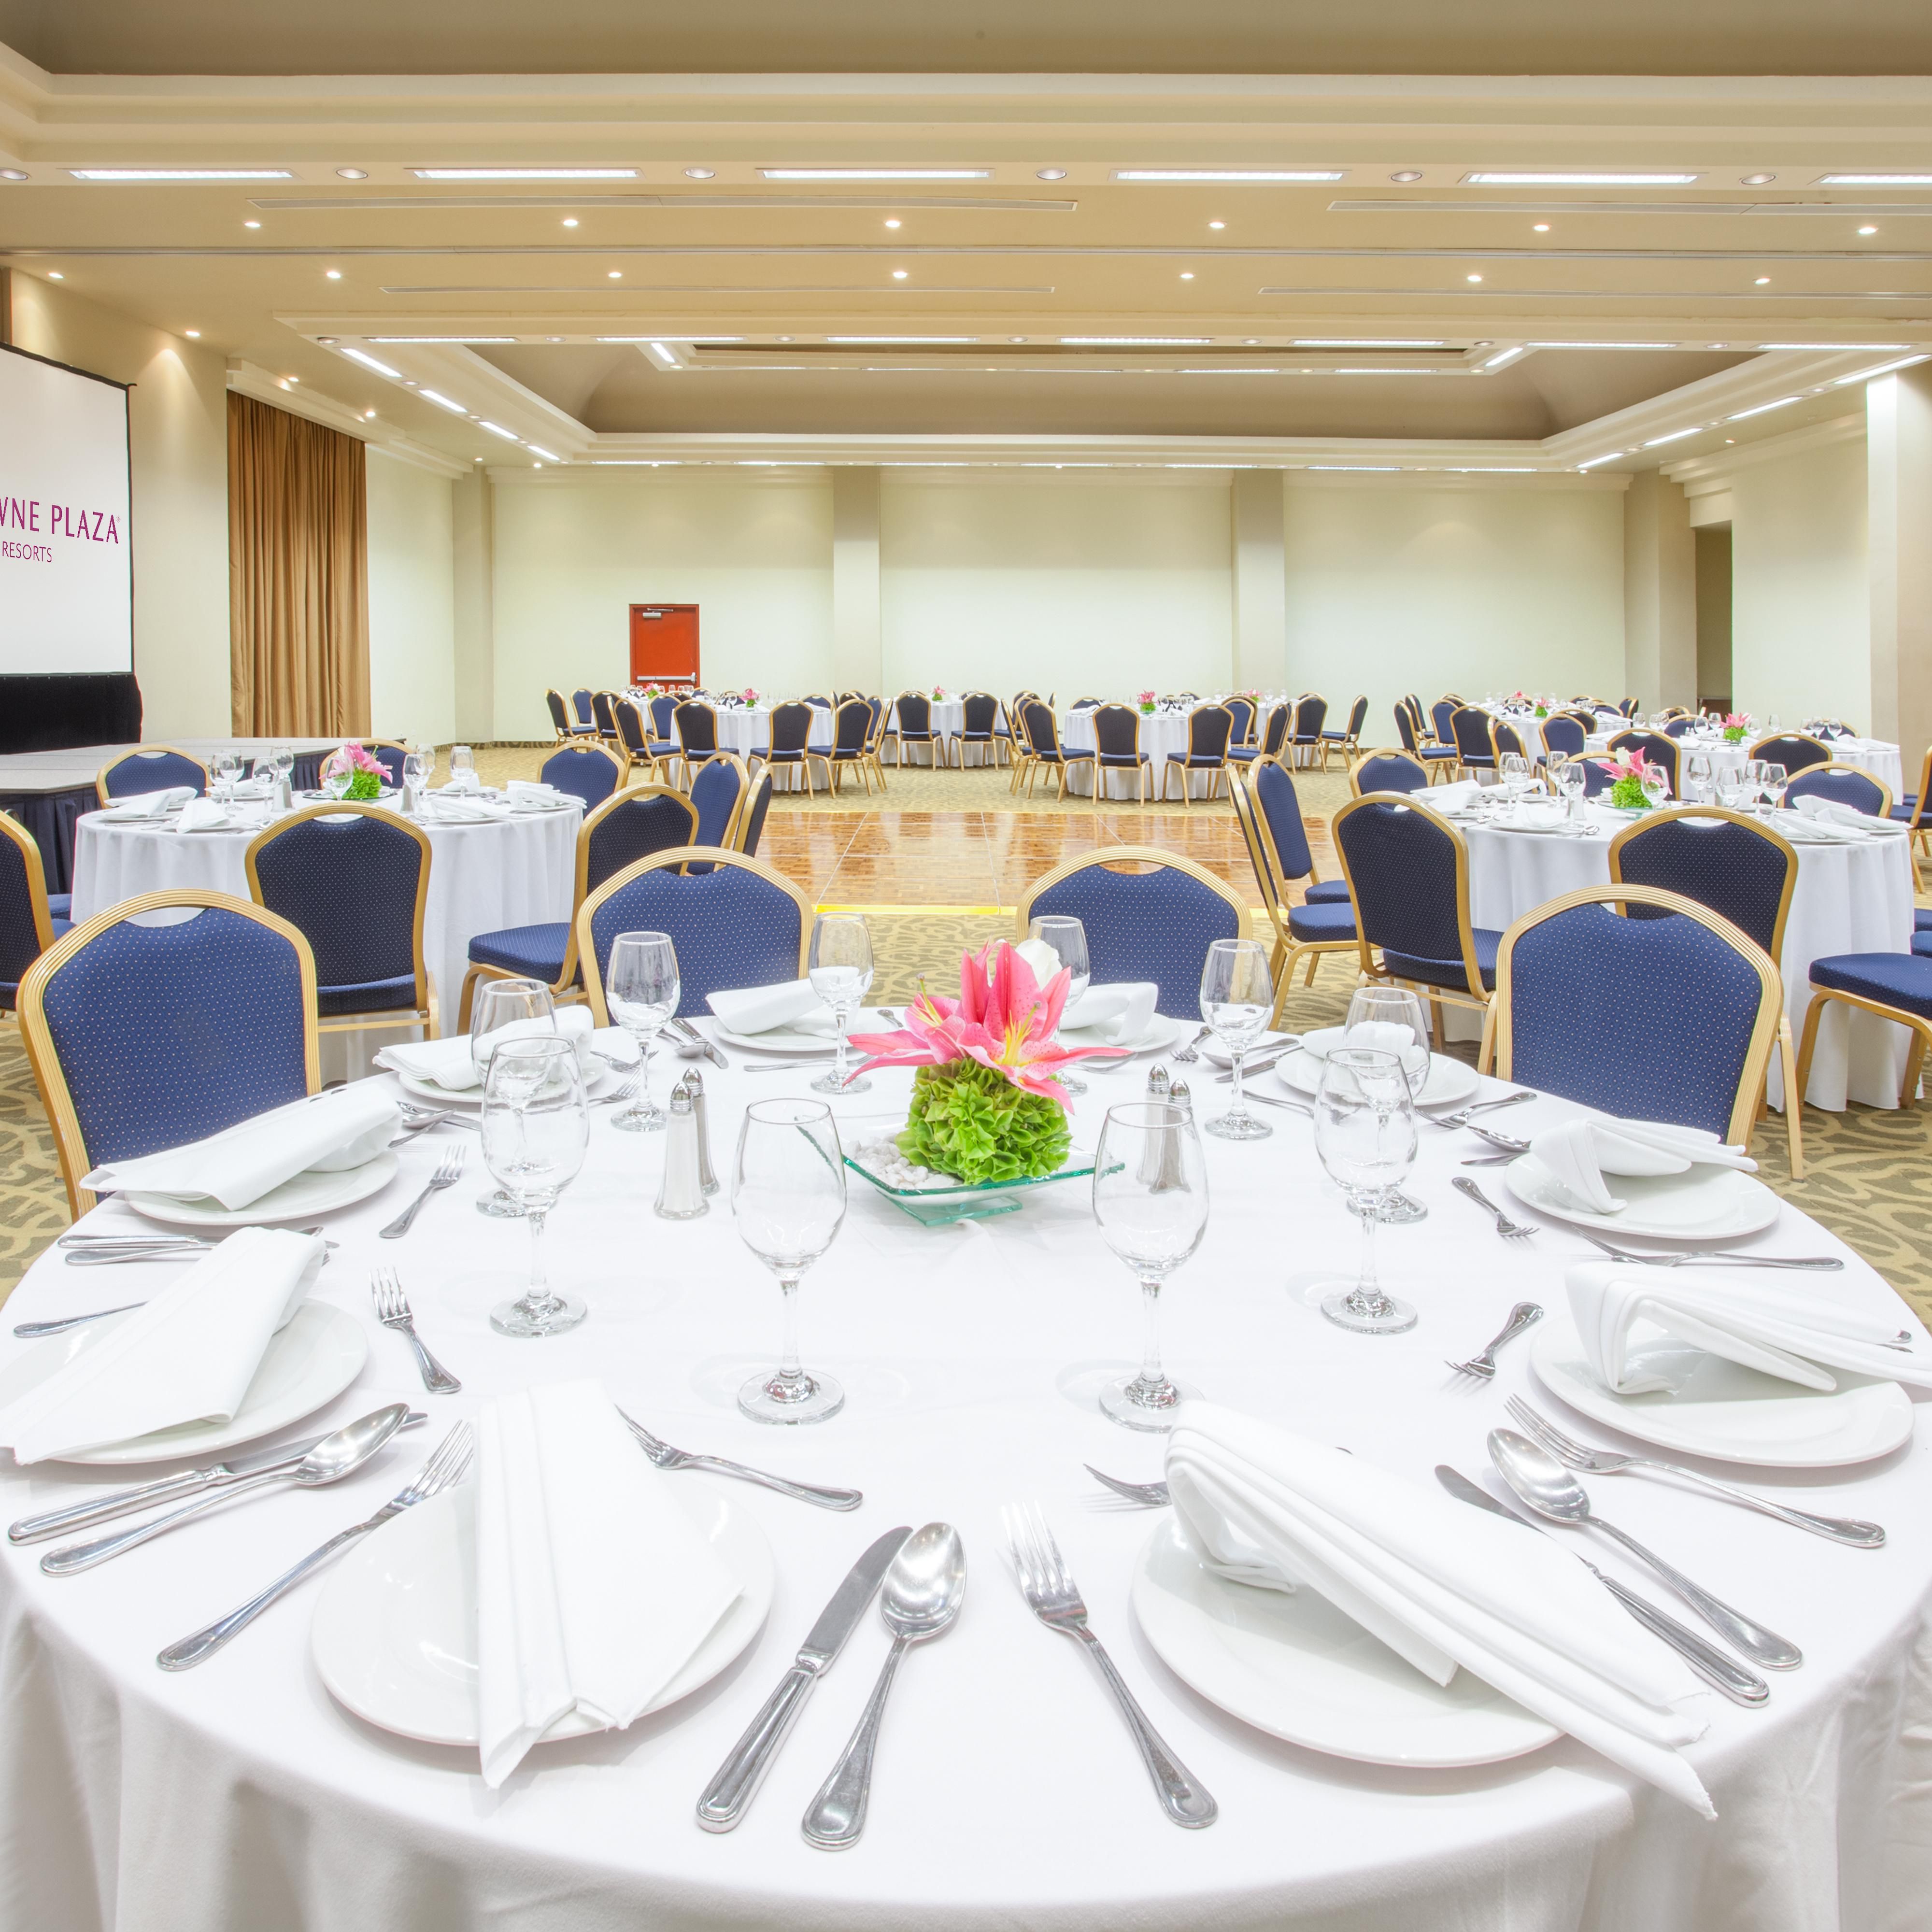 Let us take care of you and your event at Gran Apodaca Ballroom